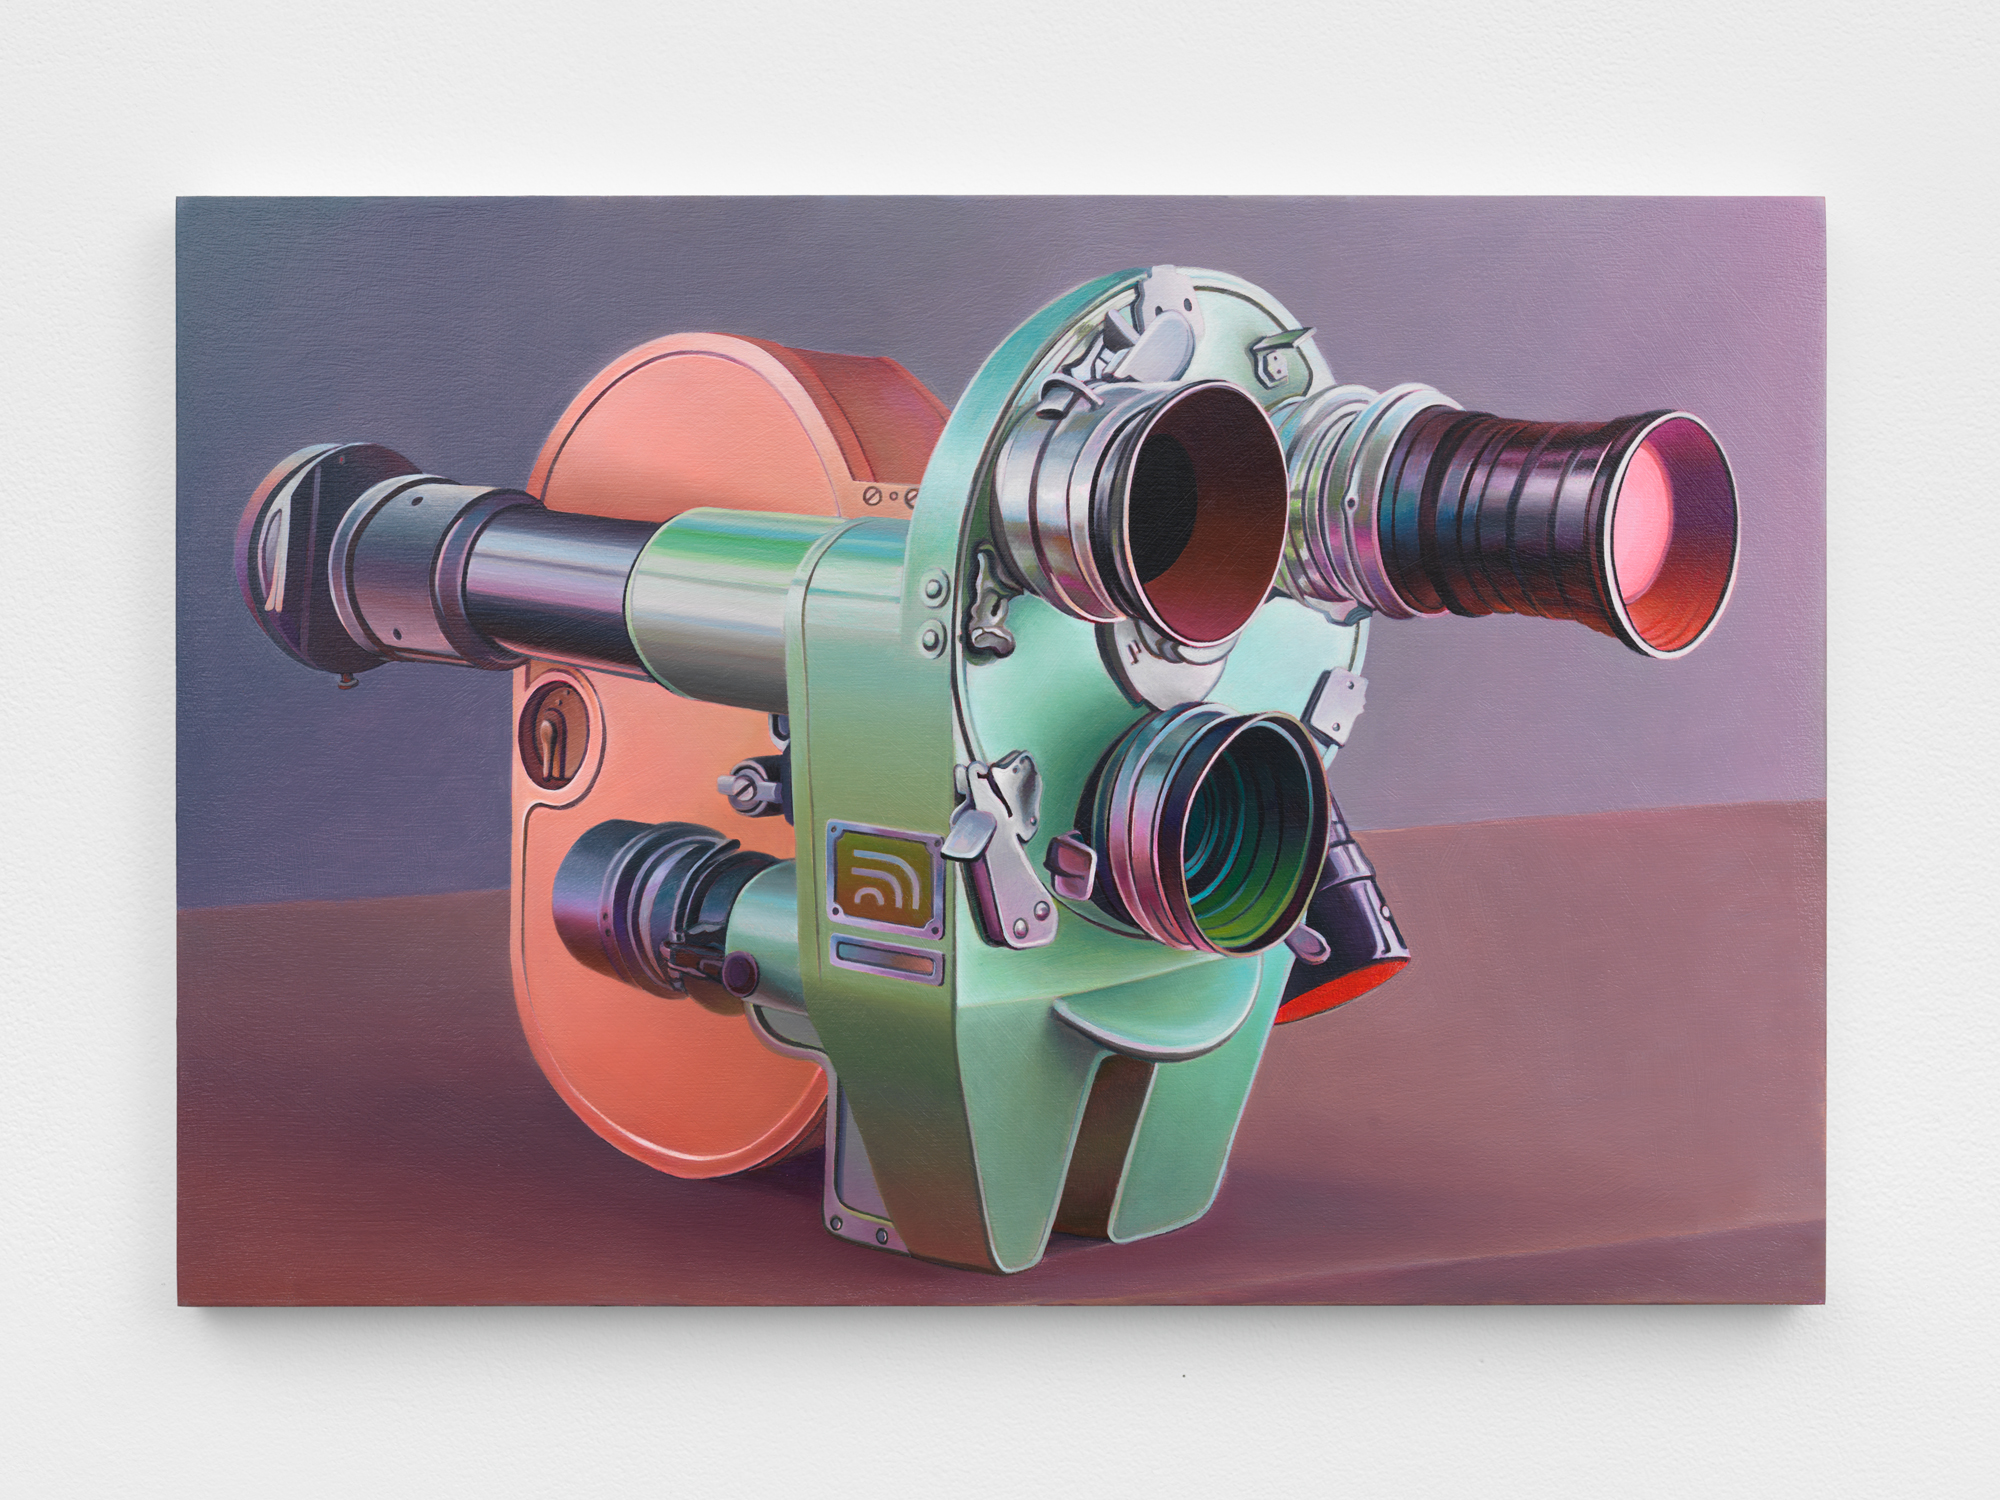 Chason Matthams, Untitled (light green and coral camera), 2018, Oil on panel, 14h x 21w in.